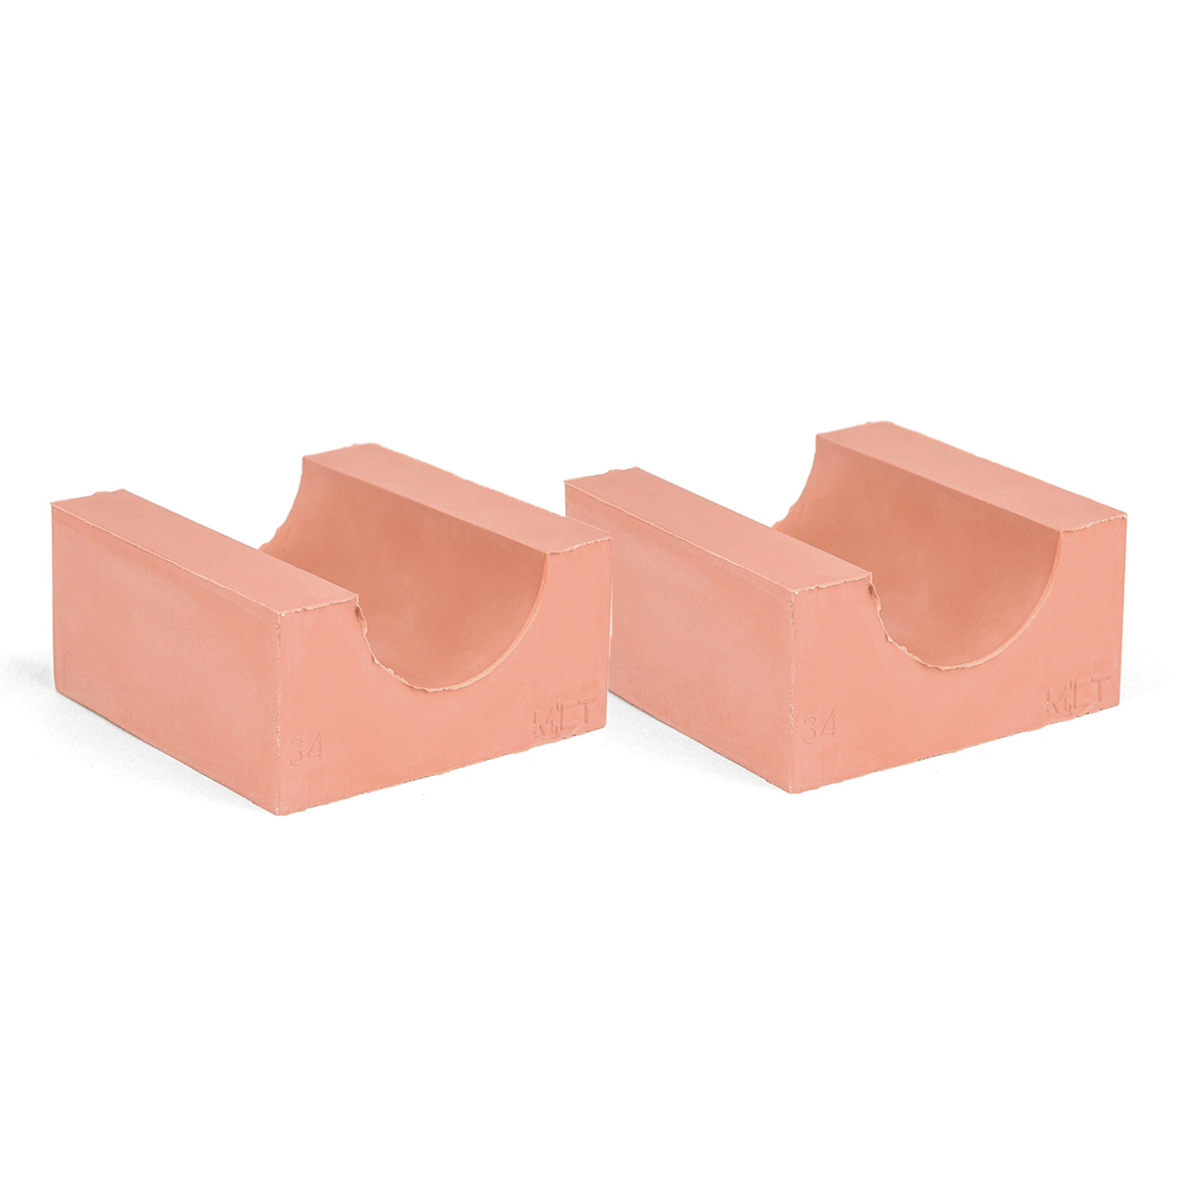 60-34*2 Set of 2 half insert block lycron, 60-34 for cable/pipe diam. 33.5-35.5mm